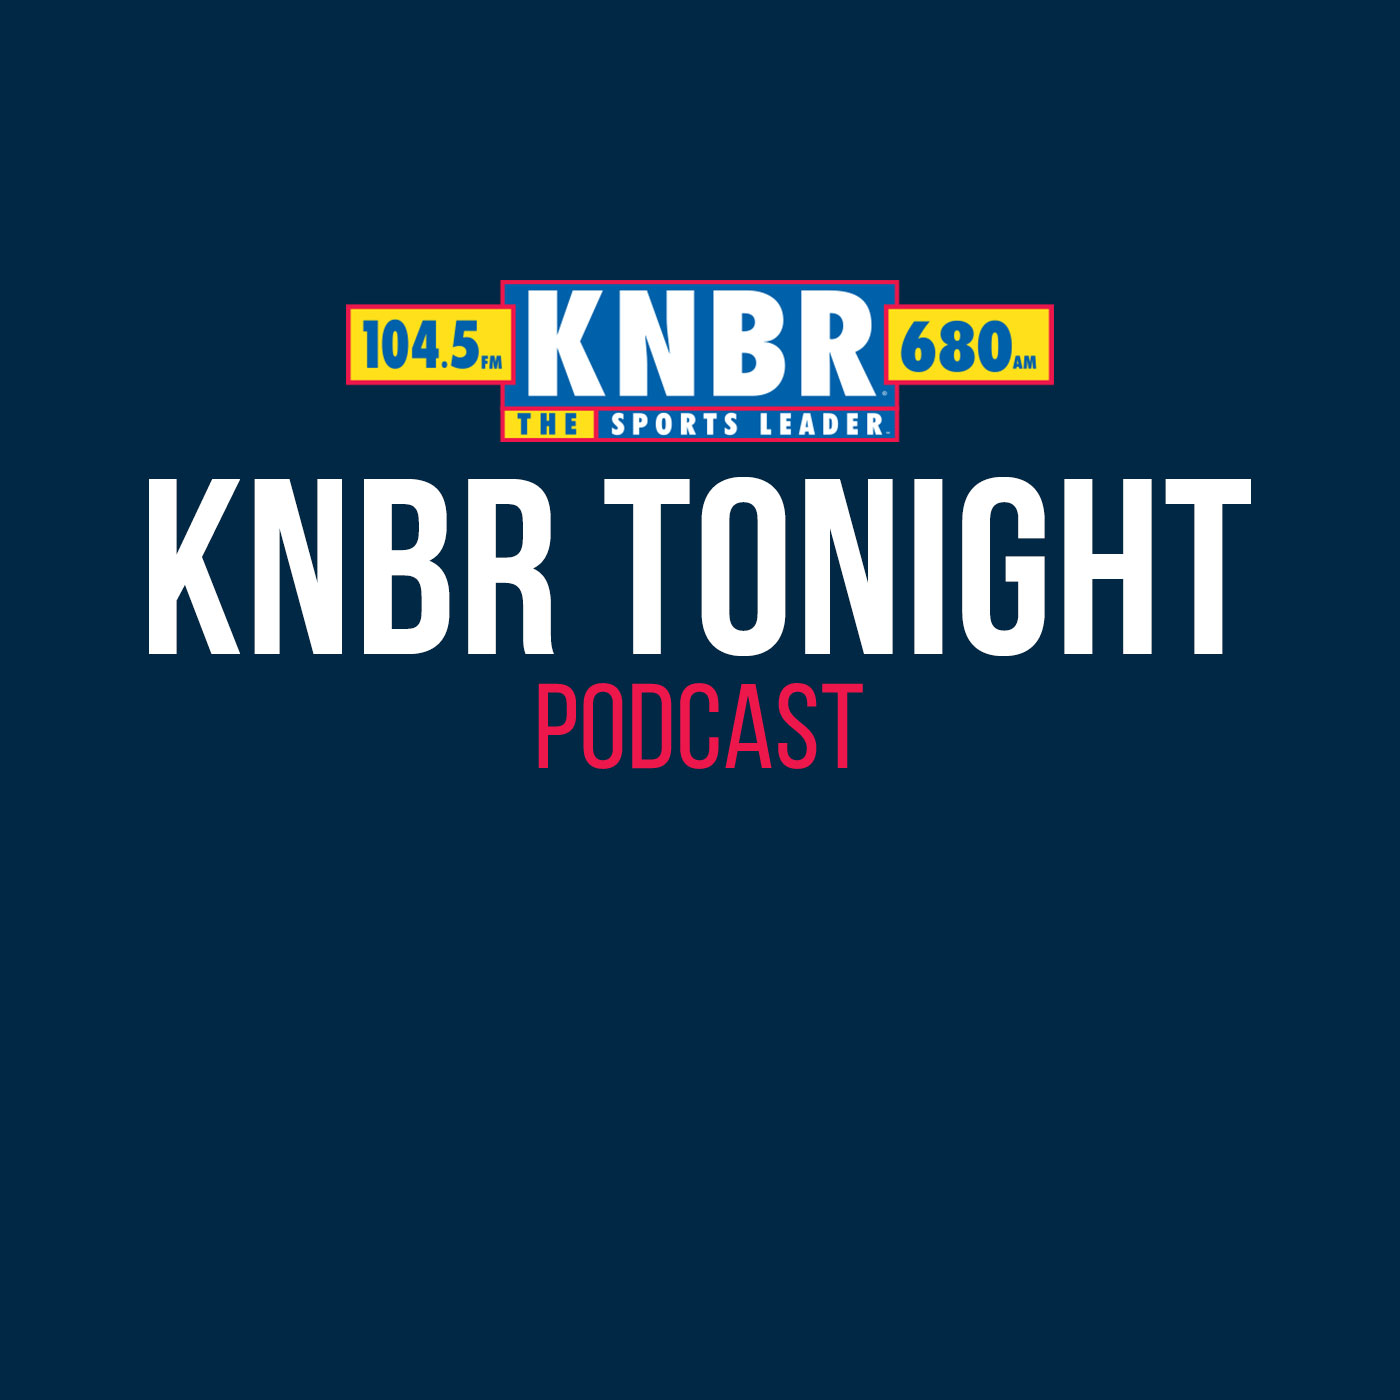 2-15 Jamaree Bouyea joins KNBR Tonight with Kerry to talk about his success this season and the Dons pivotal game vs St Mary's on Thursday